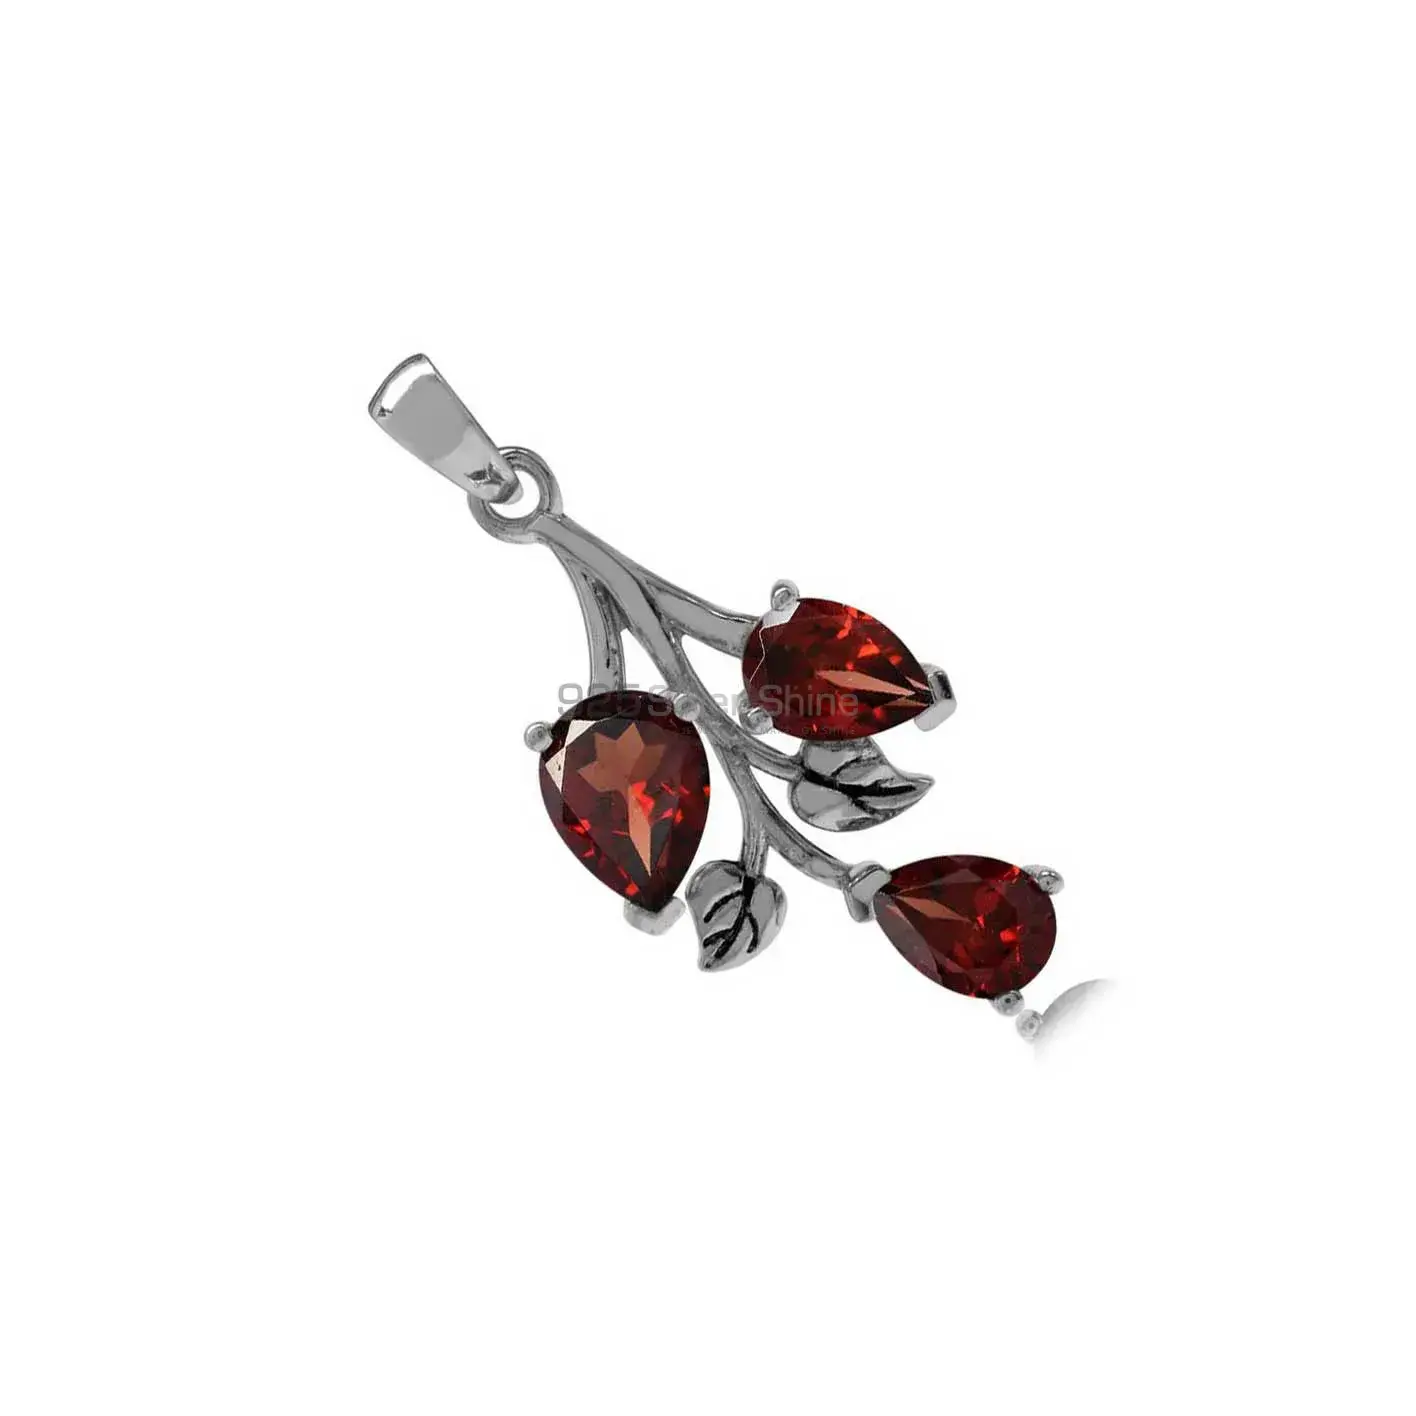 High Quality 925 Solid Silver Pendants Exporters In Garnet Gemstone Jewelry 925SP03_2